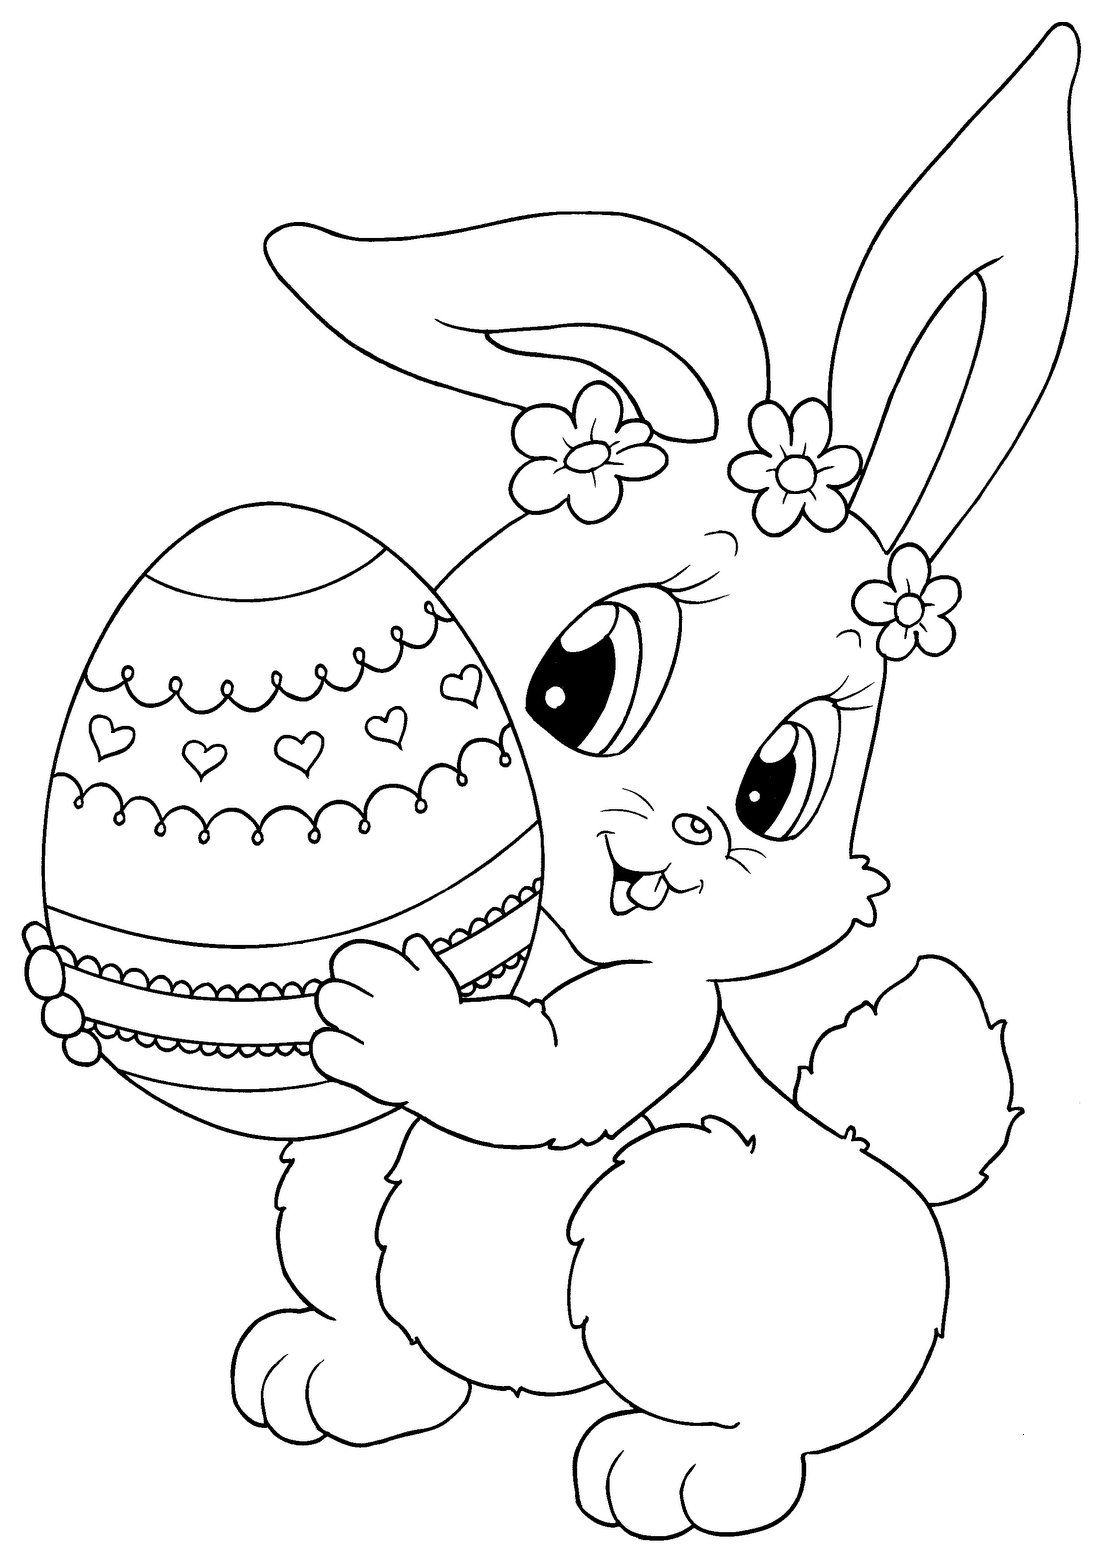 Easter Coloring Pages For Preschoolers